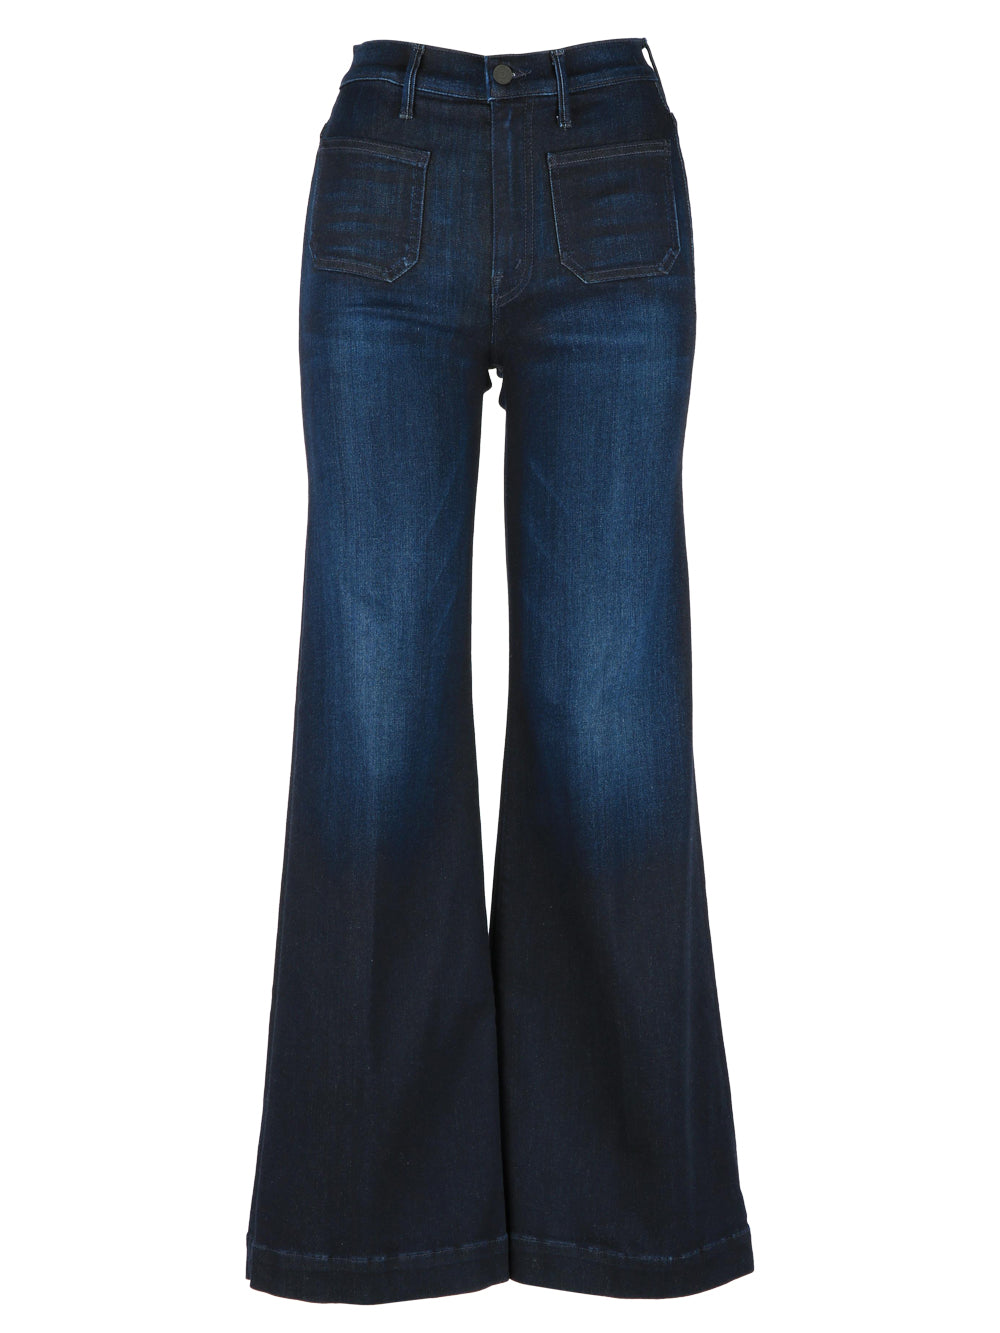 Jeans Palazzo The Swooner Patch Roller Skimp in Denim Blu Scuro